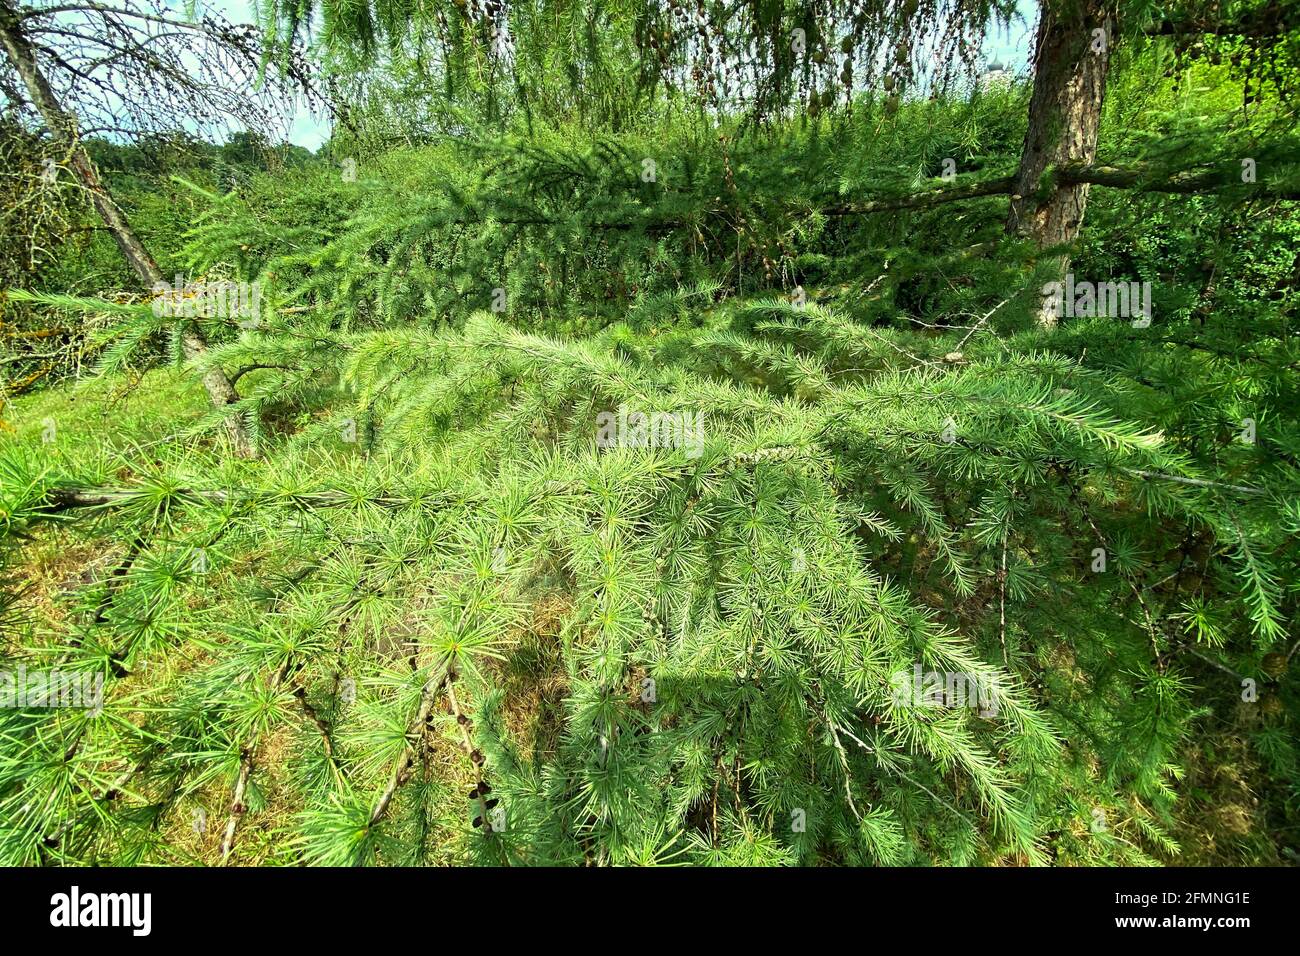 Christmas tree Abies in evergreen landscaped garden. Green spruce needles on fir. Clear sunny day. Stock Photo